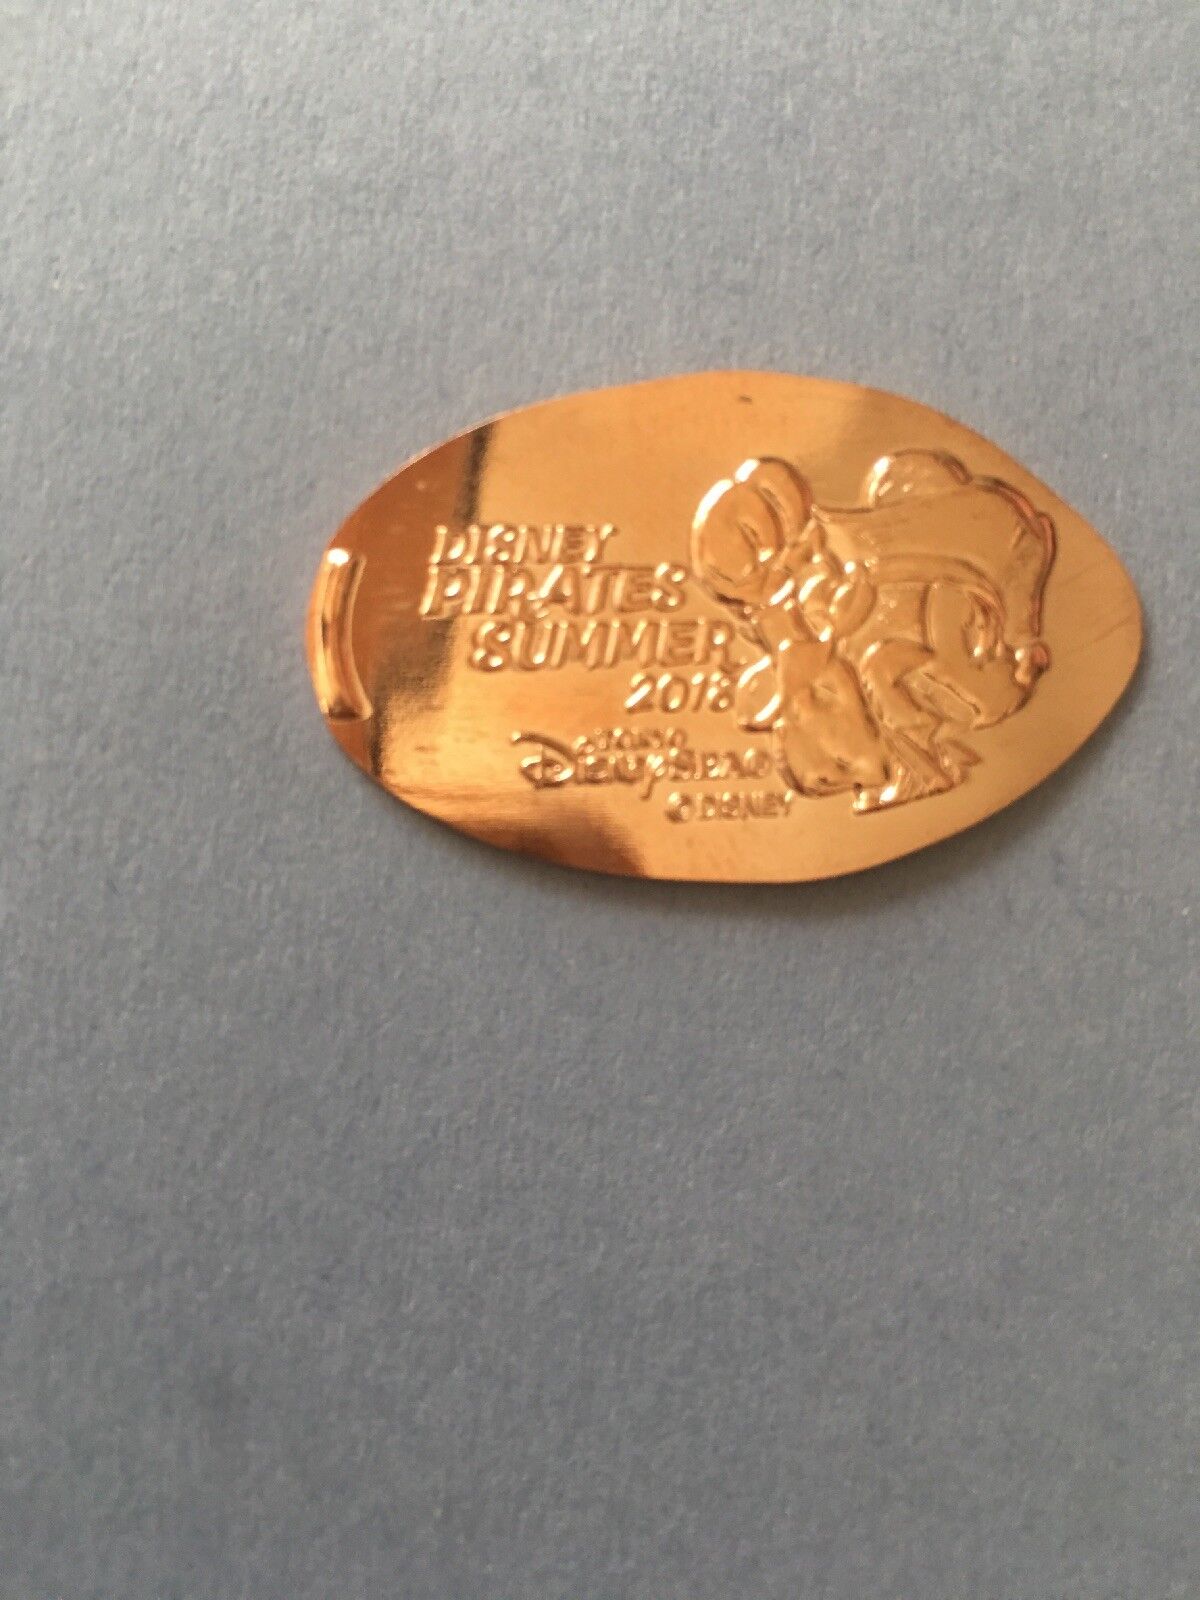 MICKEY MOUSE 2018 Tokyo Disney Sea Elongated Pressed Medal Pirates Summer Penny